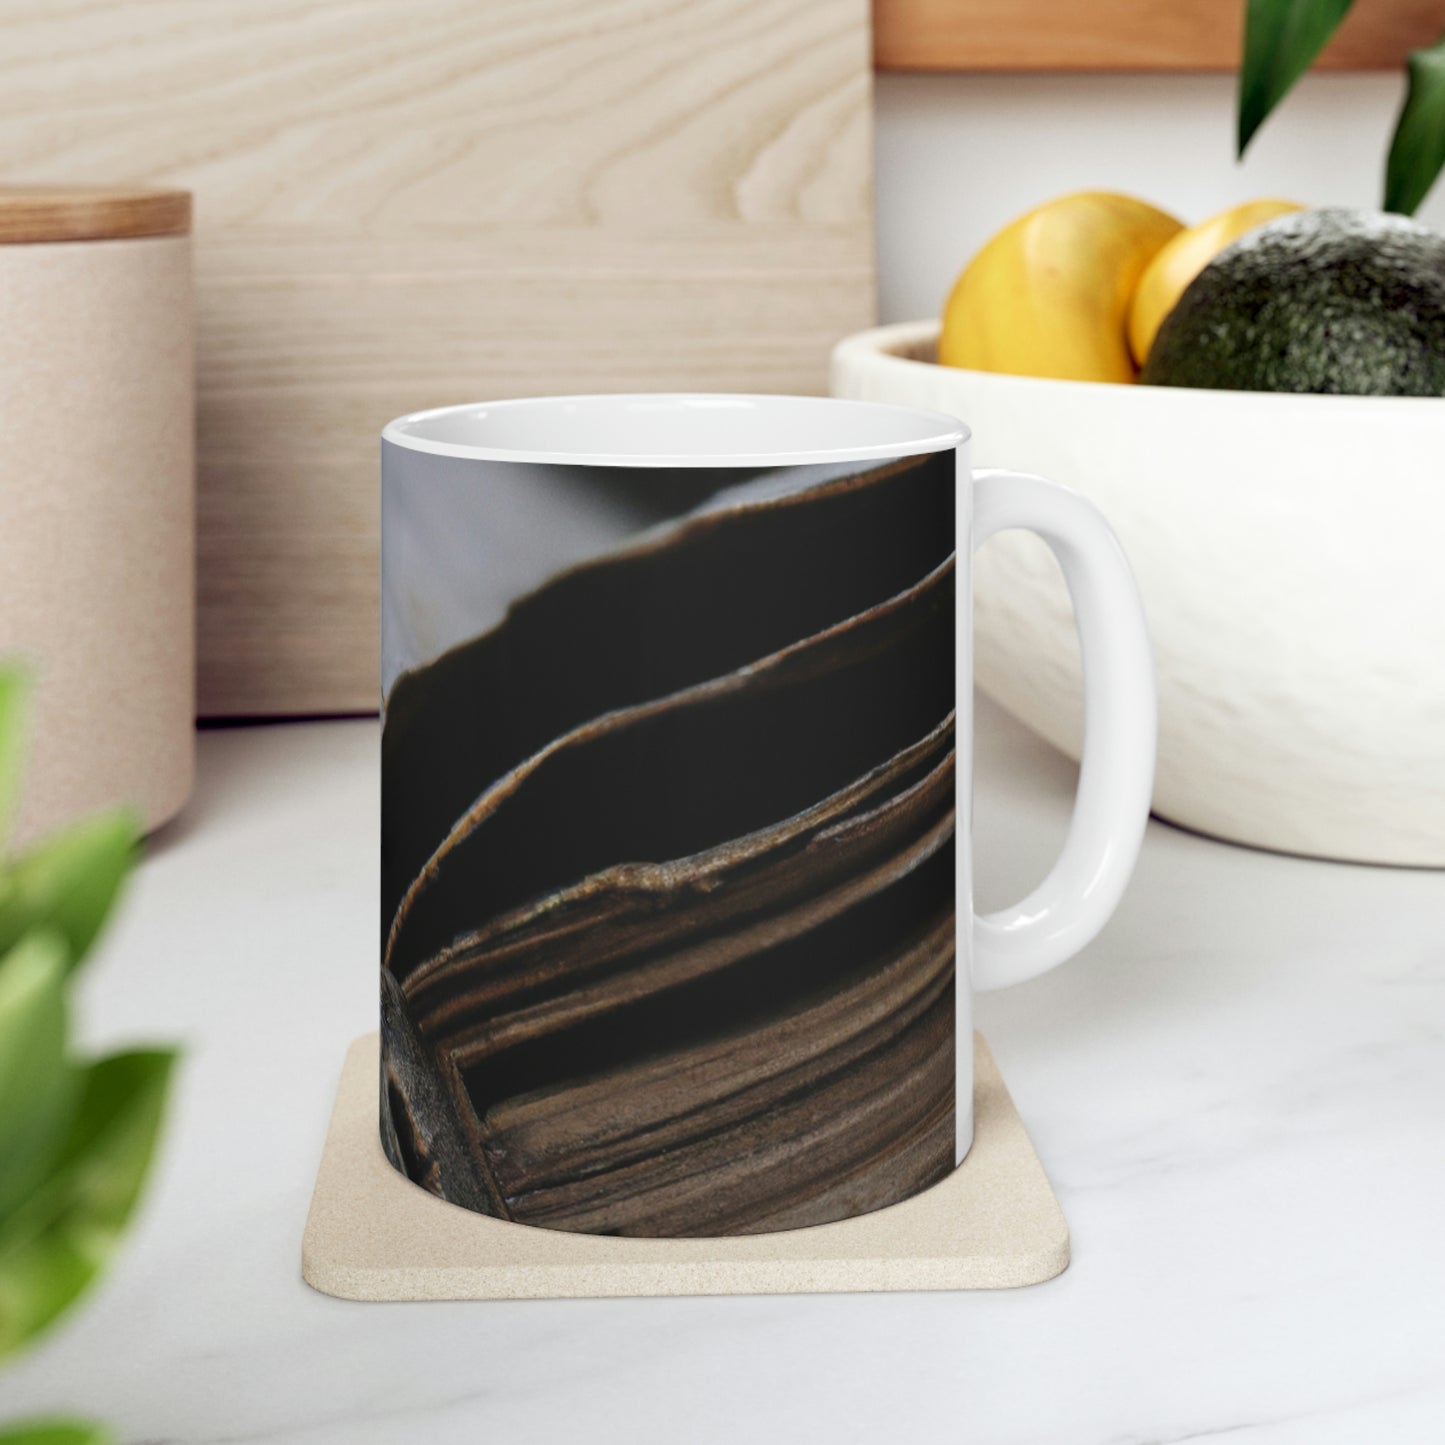 Unbeknownst to its readers, the book possesses magical powers.

"The Forgotten Tome of Magic" - The Alien Ceramic Mug 11 oz